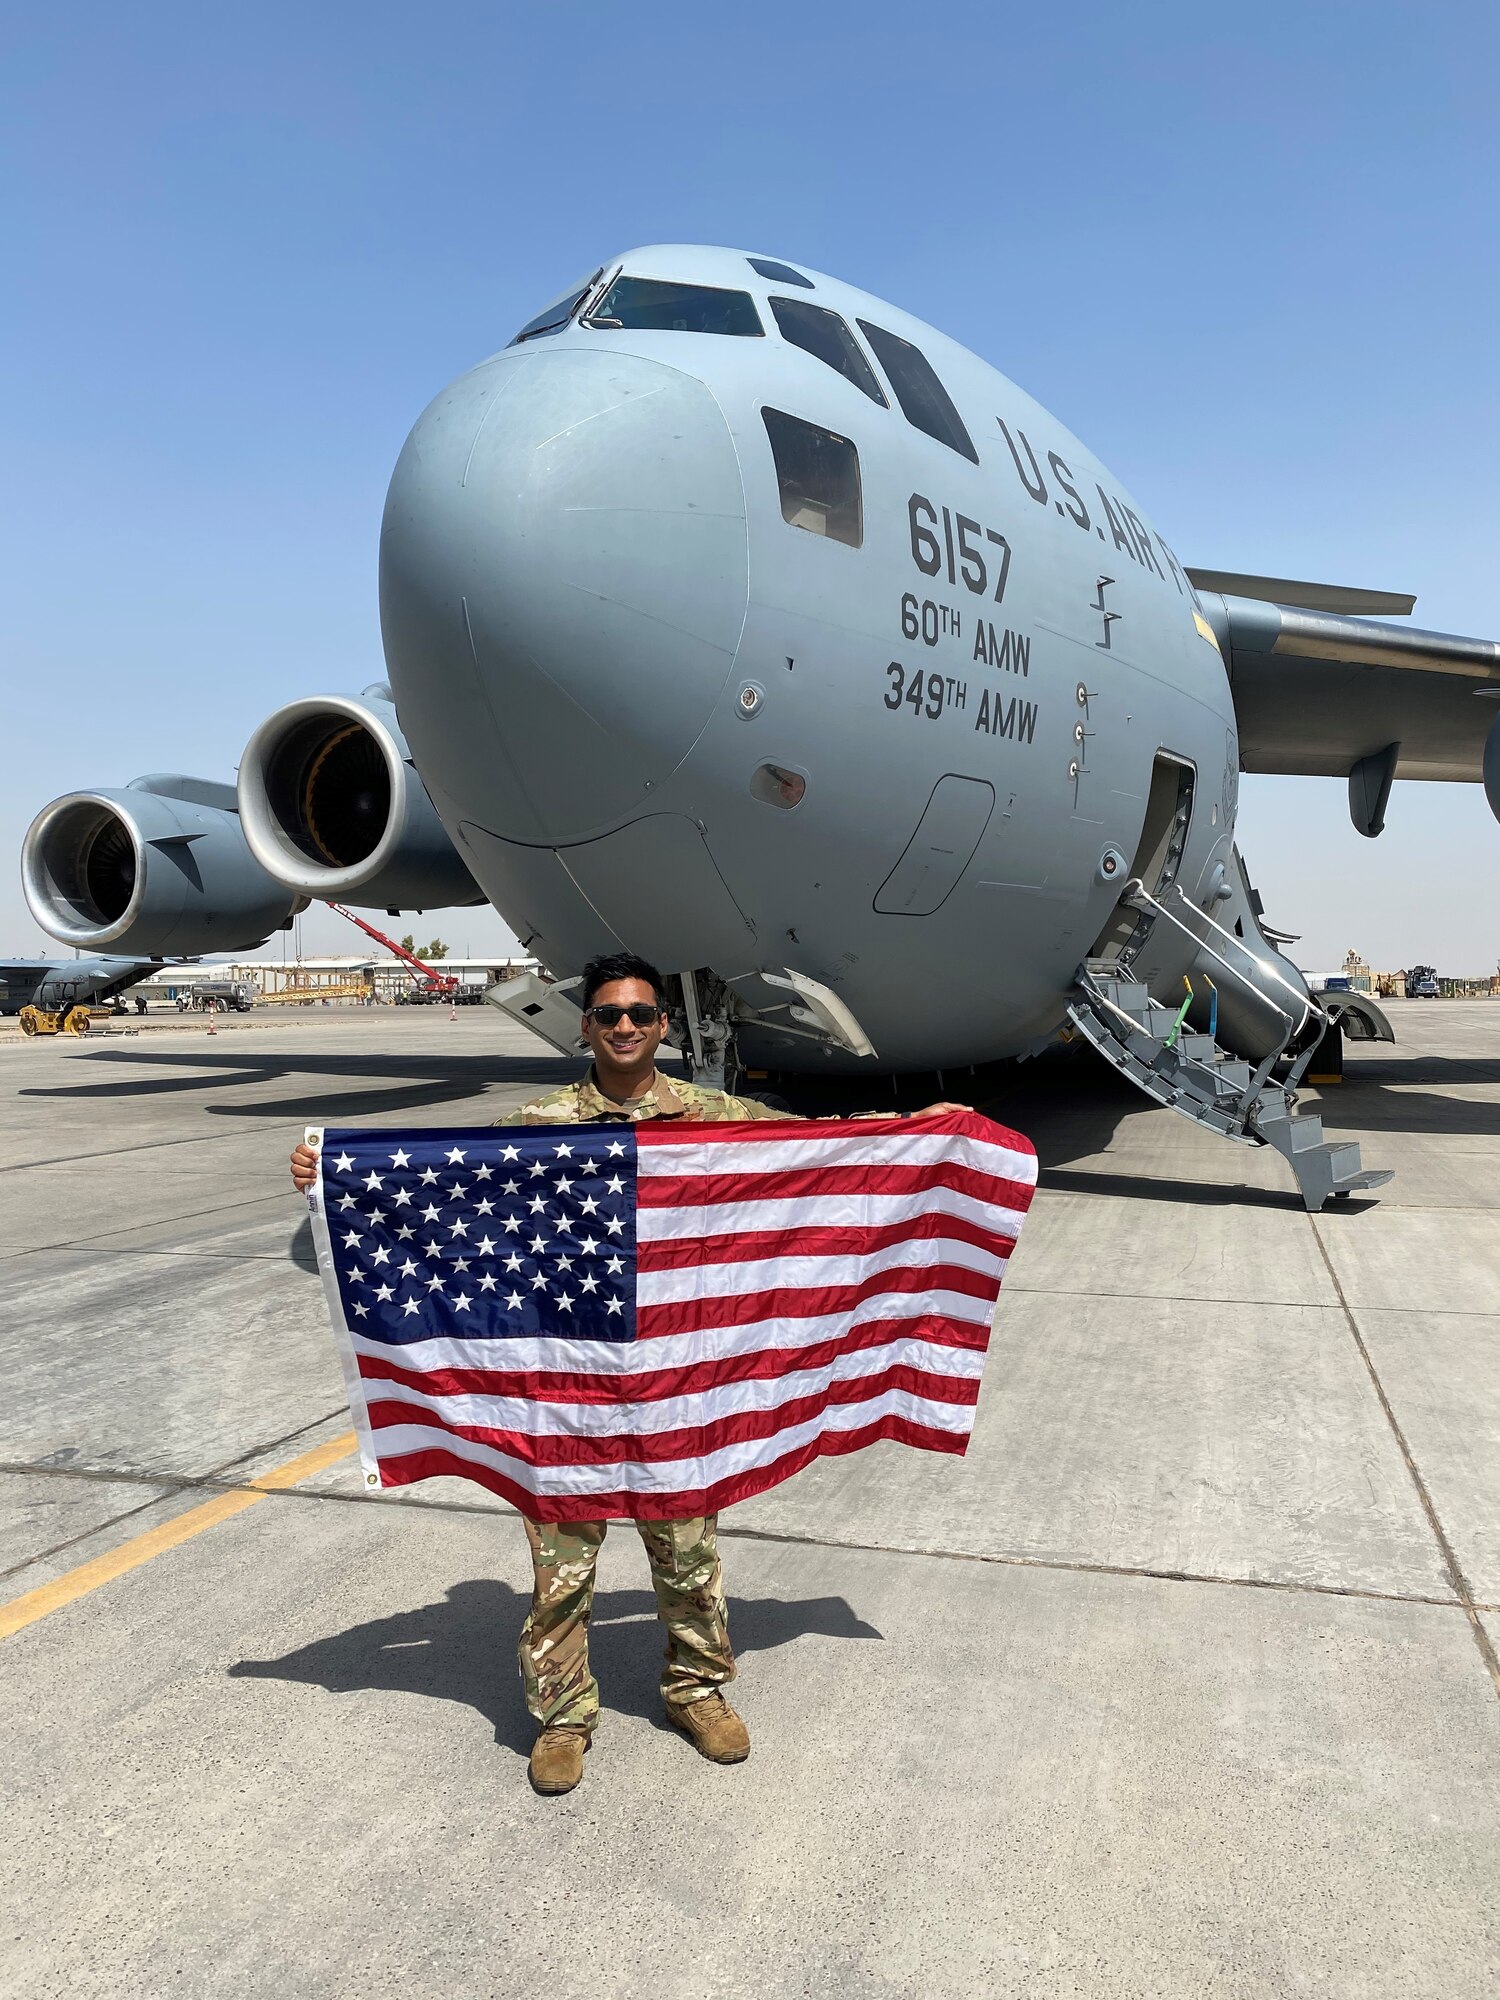 Airman in front of aircraft